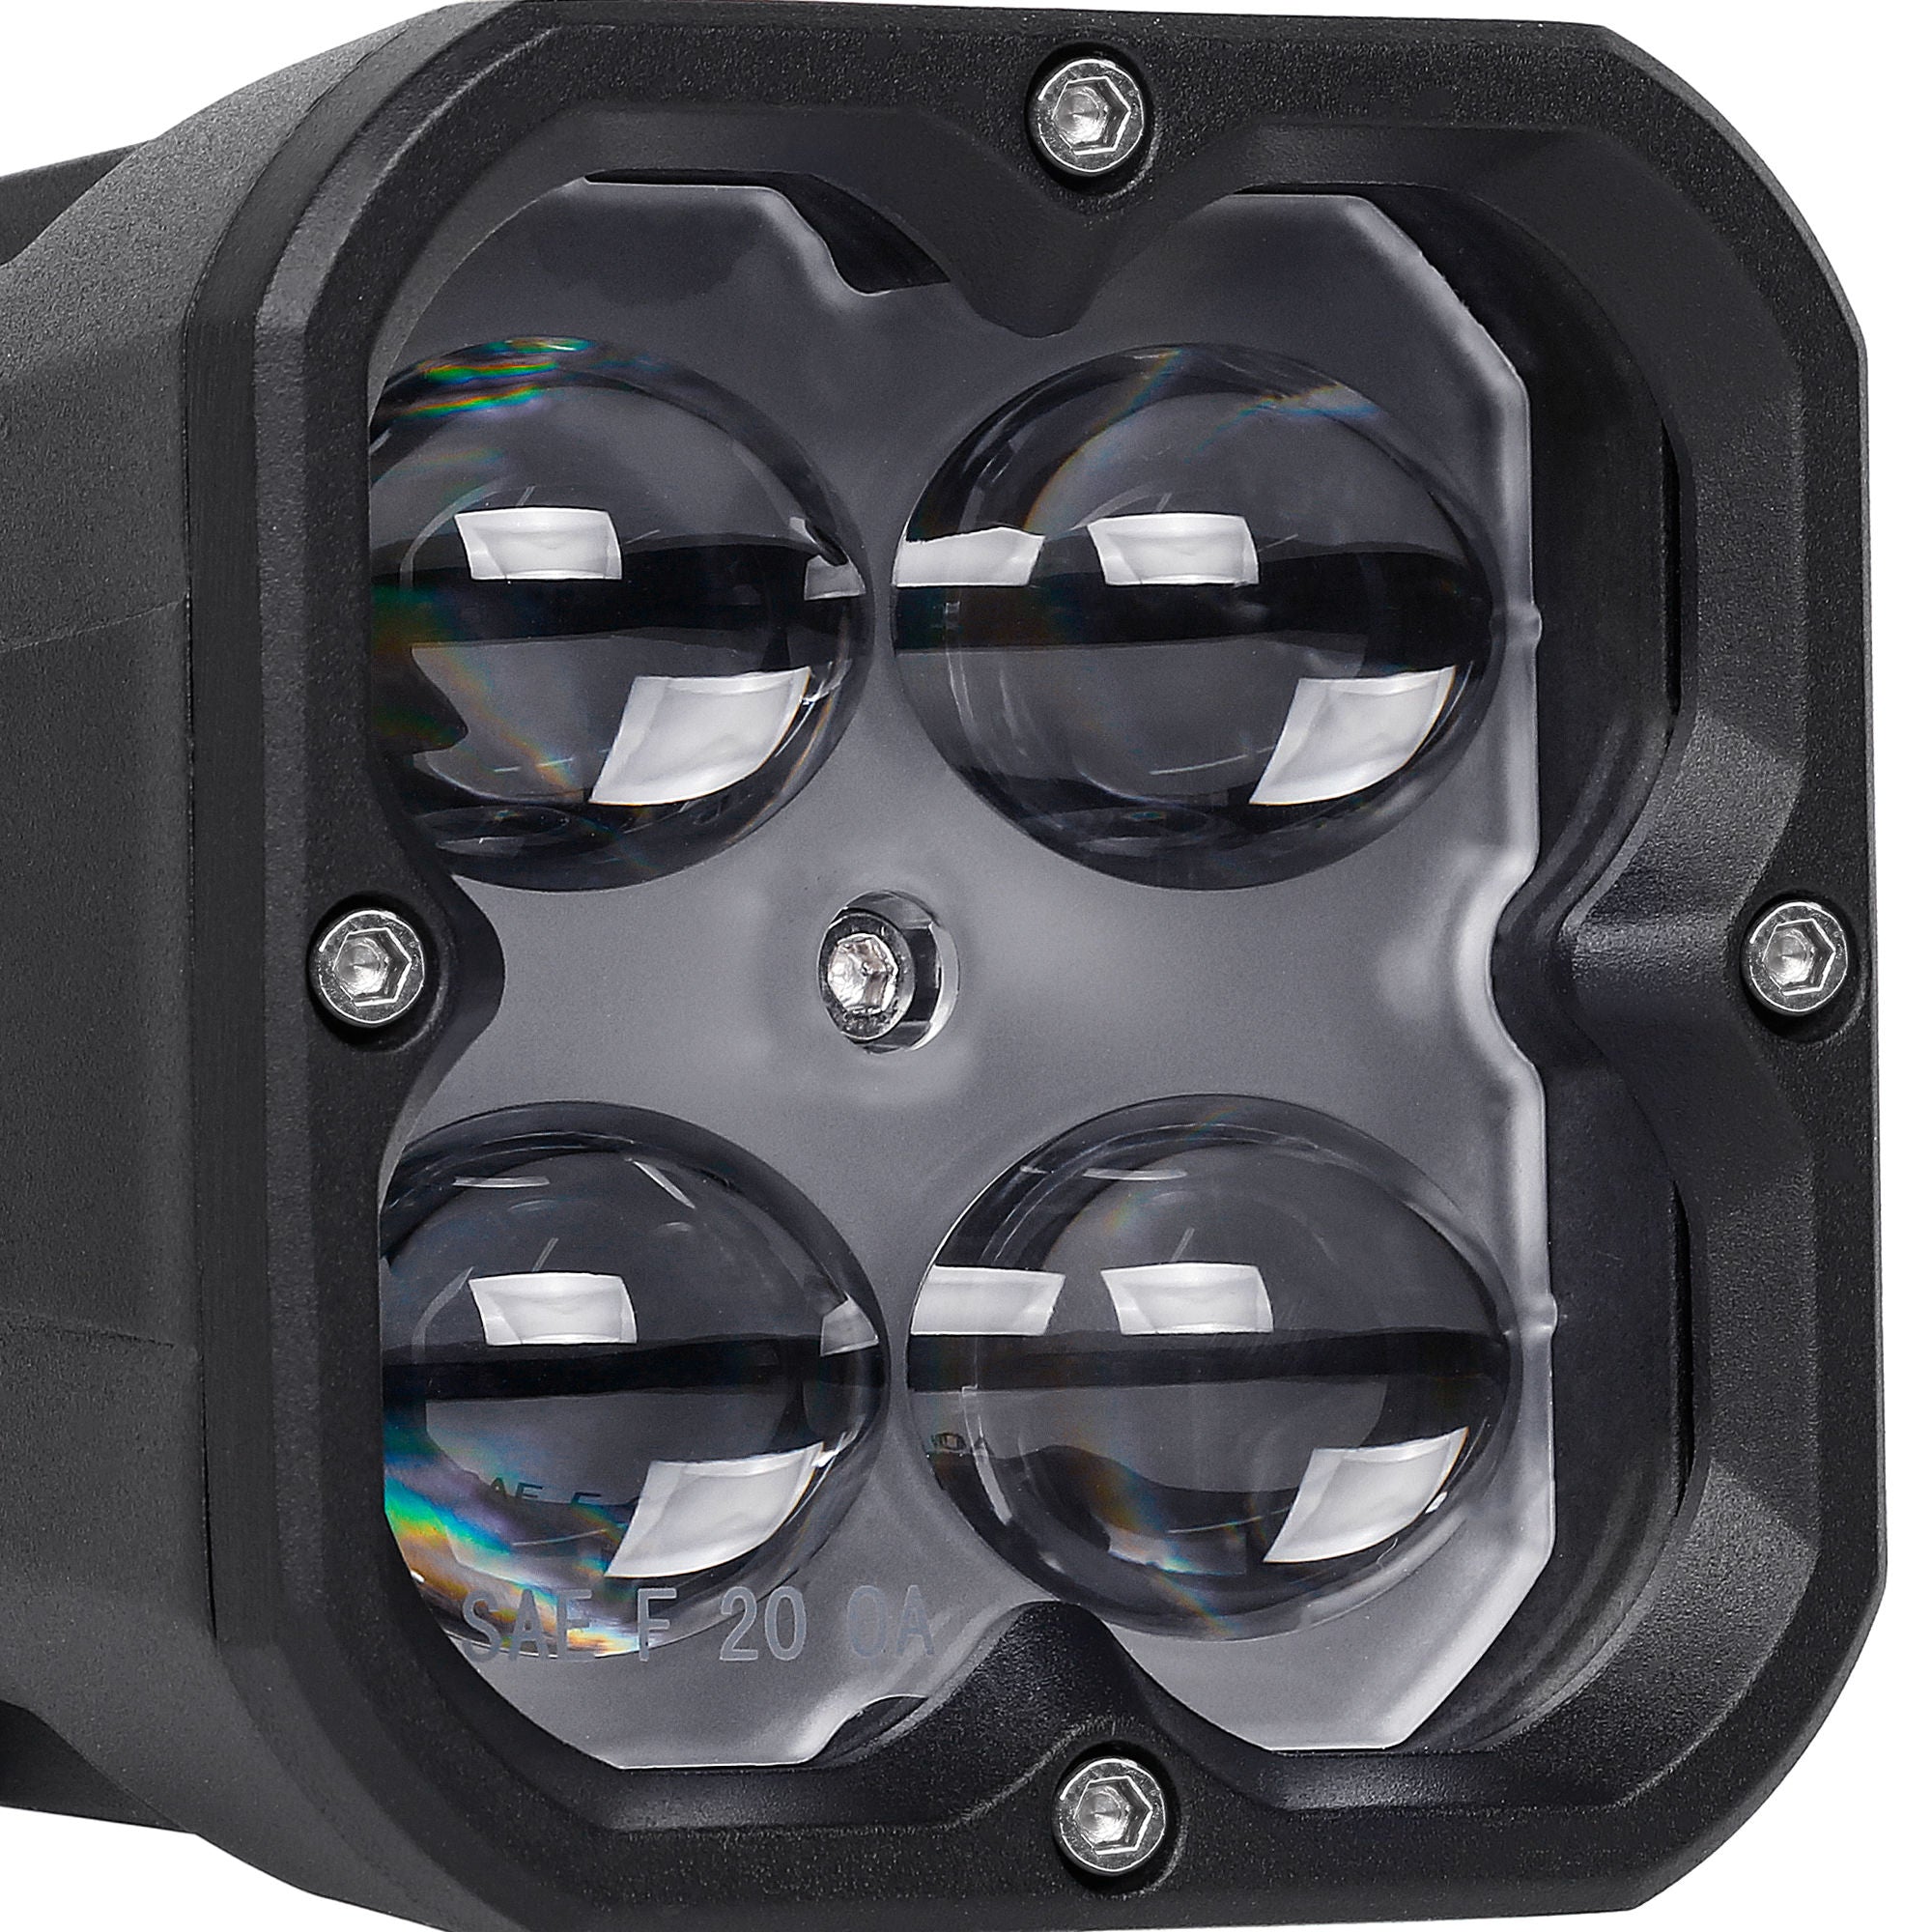 CLD CLDPCFG - 3" Street Legal LED Pod Light - Auxiliary Square Fog Light (620 Lumens)